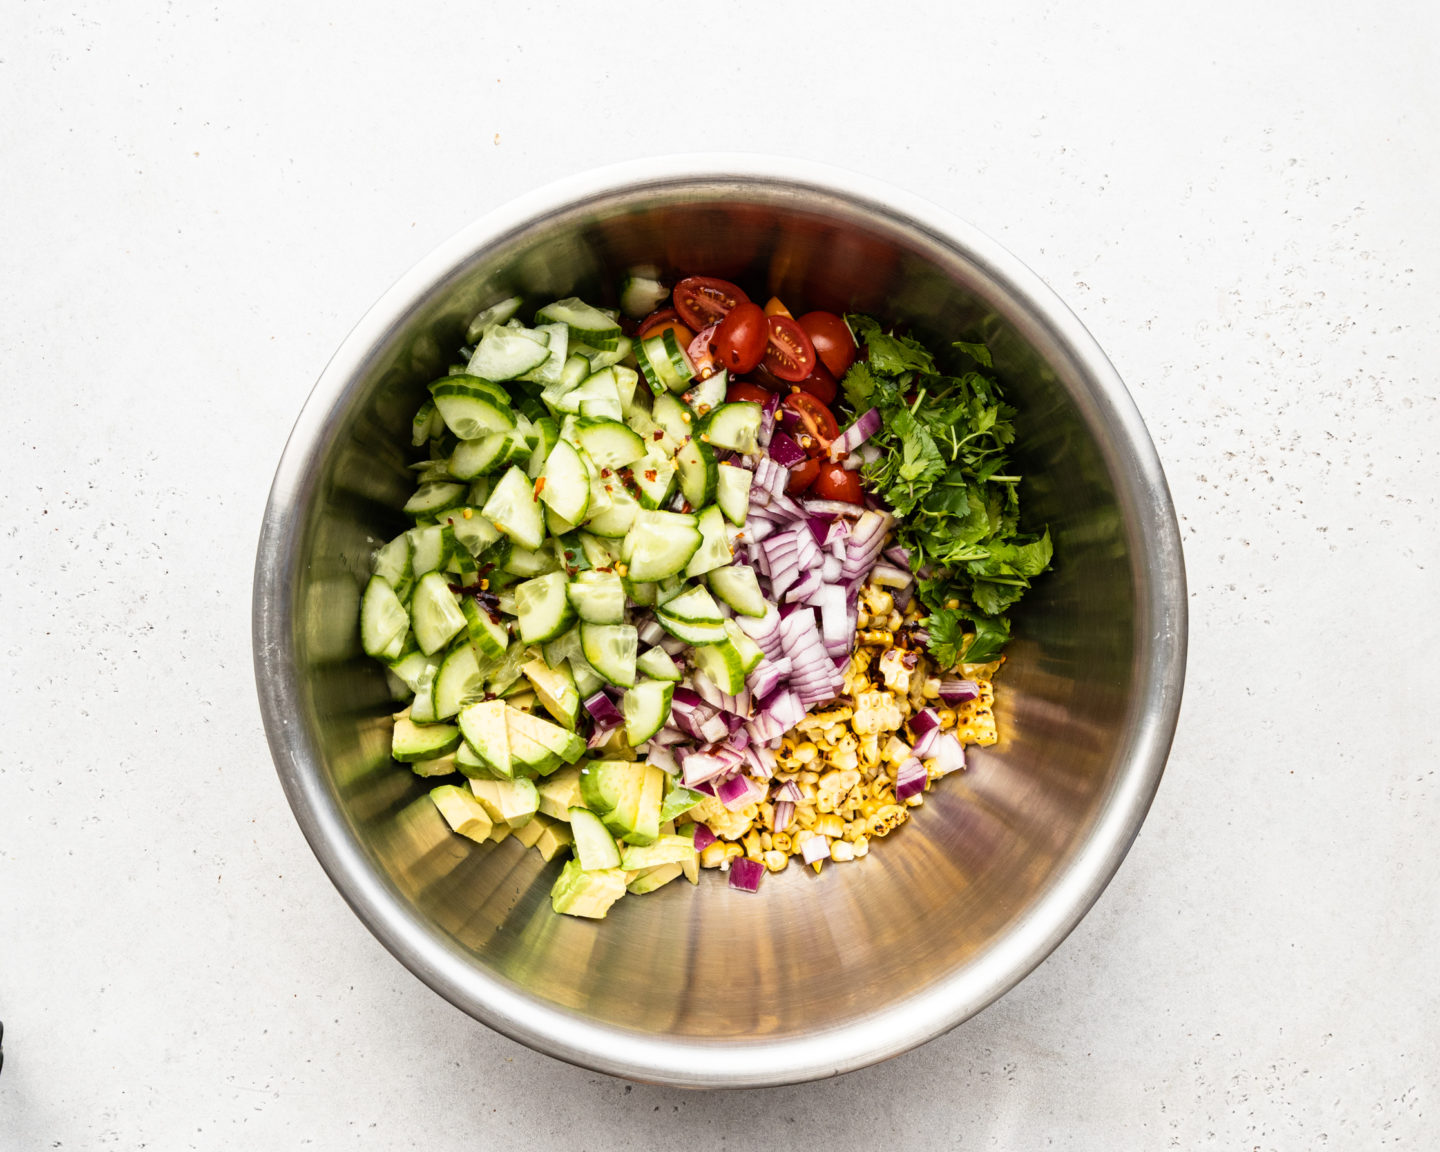 chopped vegetables in a bowl